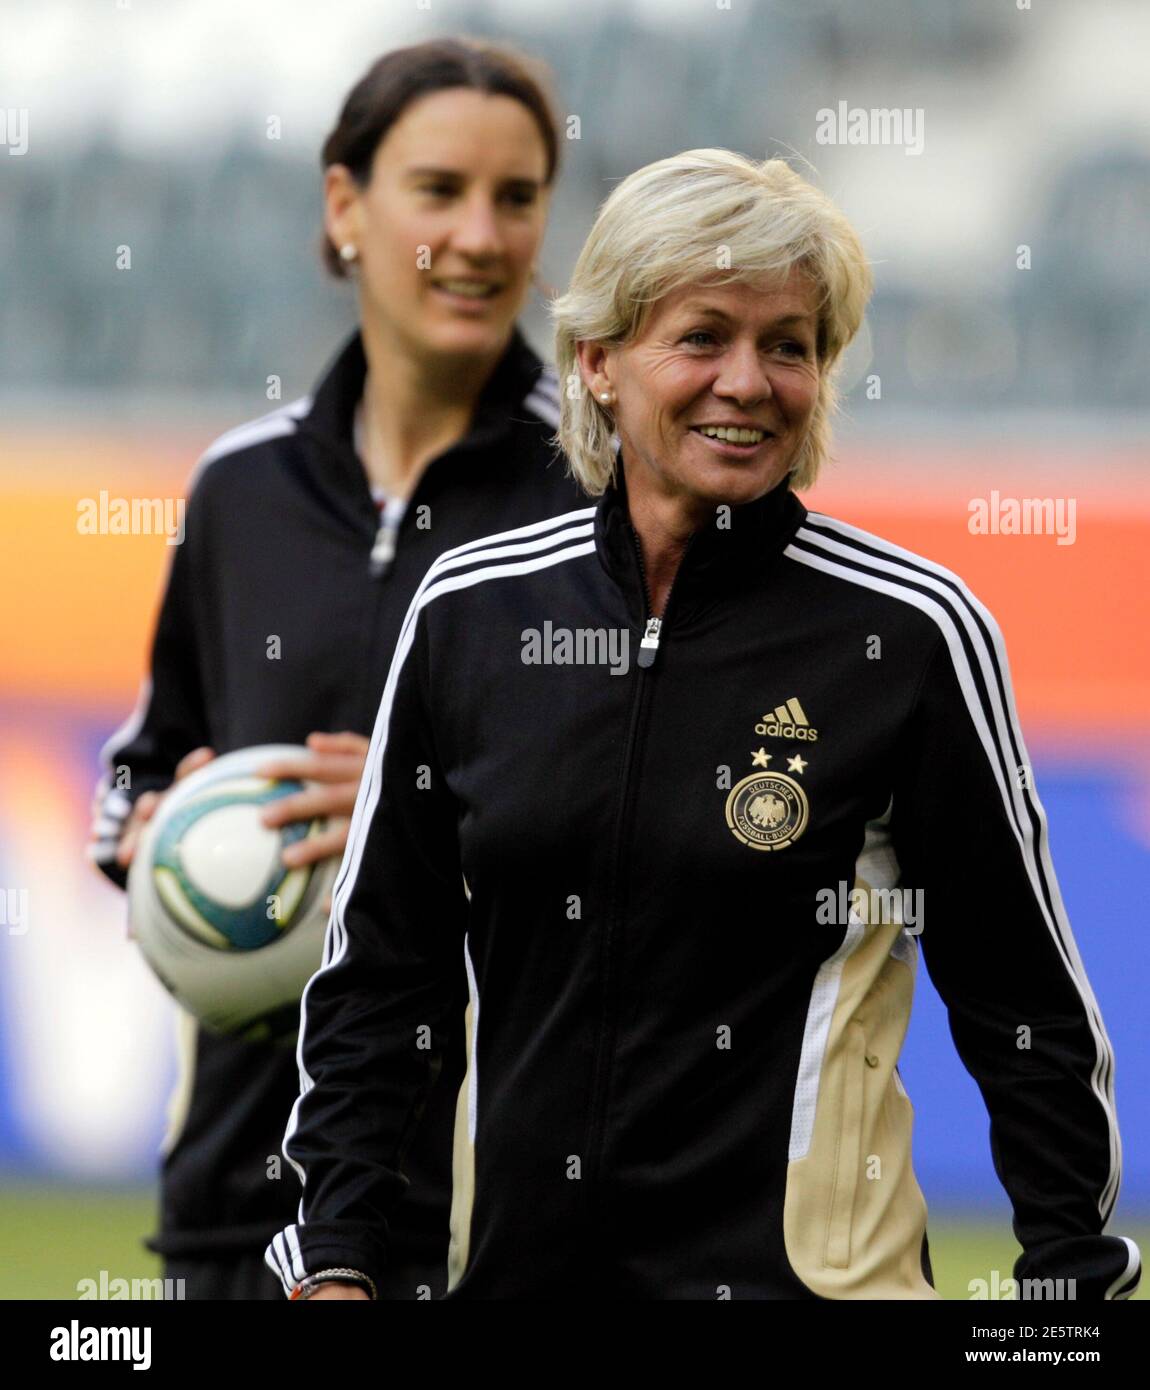 Page 2 - Coach Silvia Neid Germany On High Resolution Stock Photography and  Images - Alamy